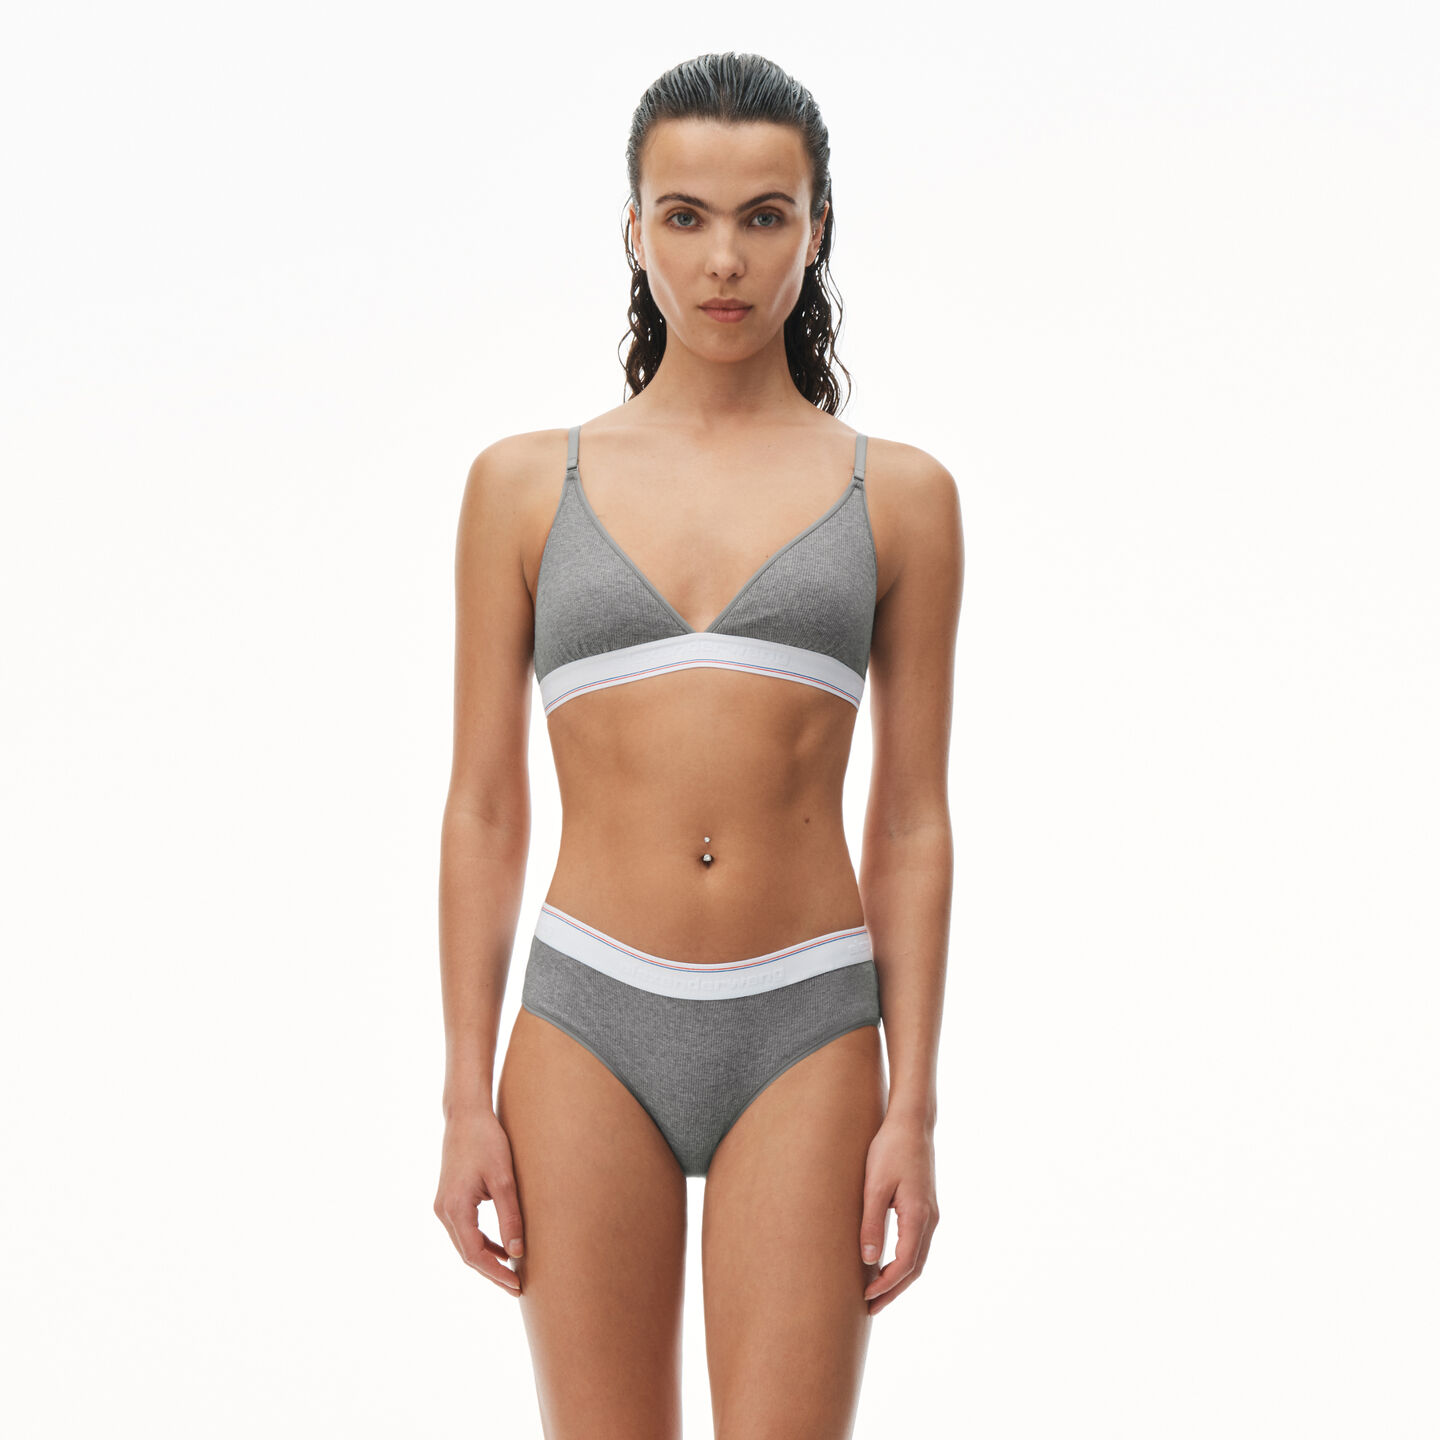 Alexander Wang Logo Band Bra (Small) Gray - $110 New With Tags - From Anne